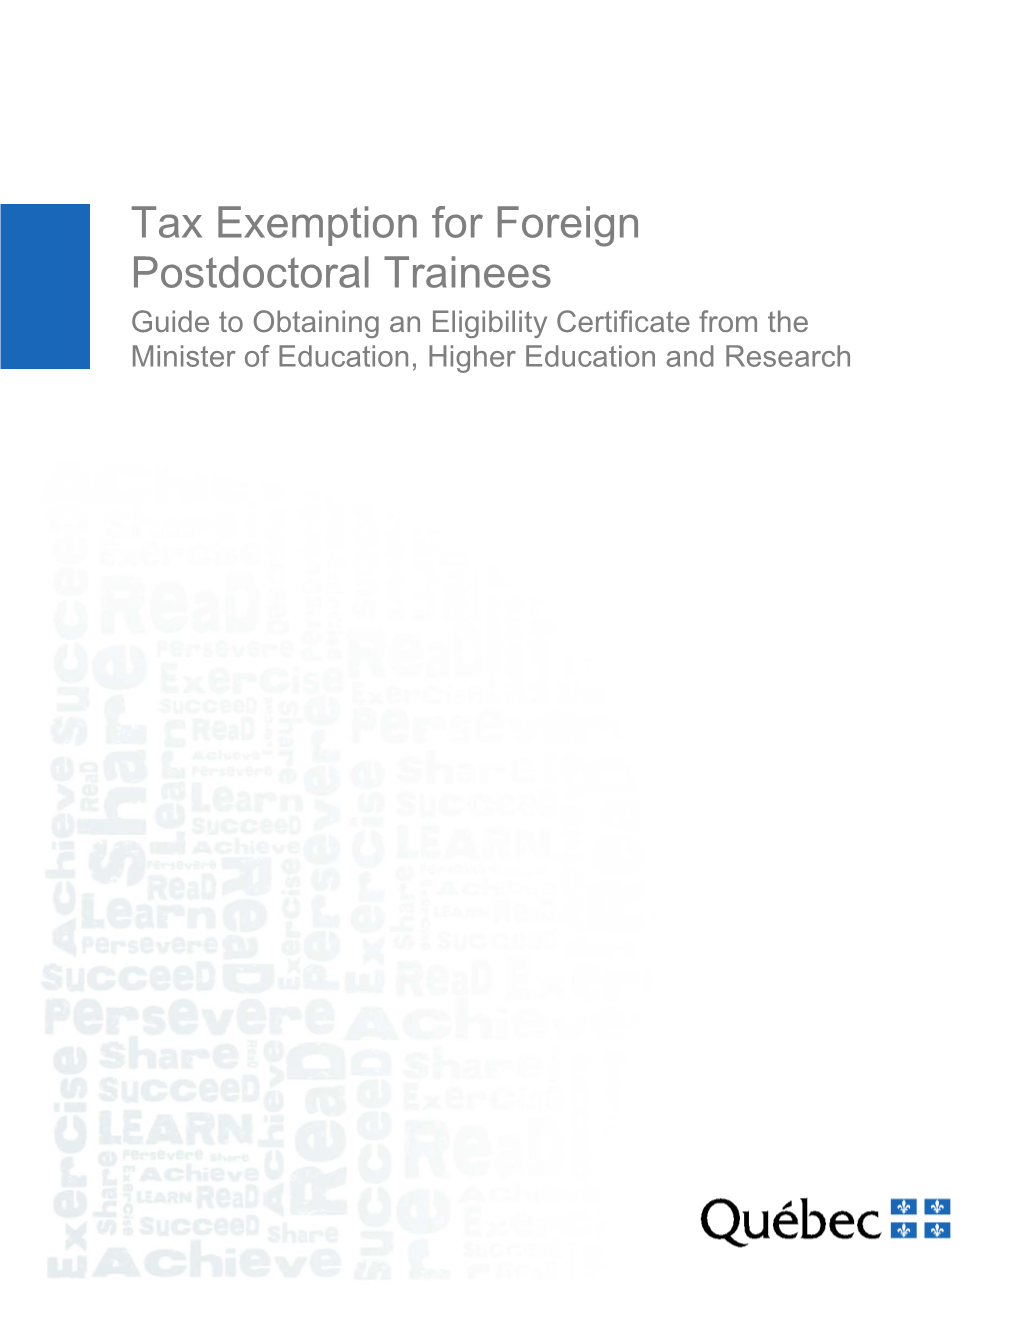 Tax Exemption for Foreign Postdoctoral Trainees Guide to Obtaining an Eligibility Certificate from the Minister of Education, Higher Education and Research